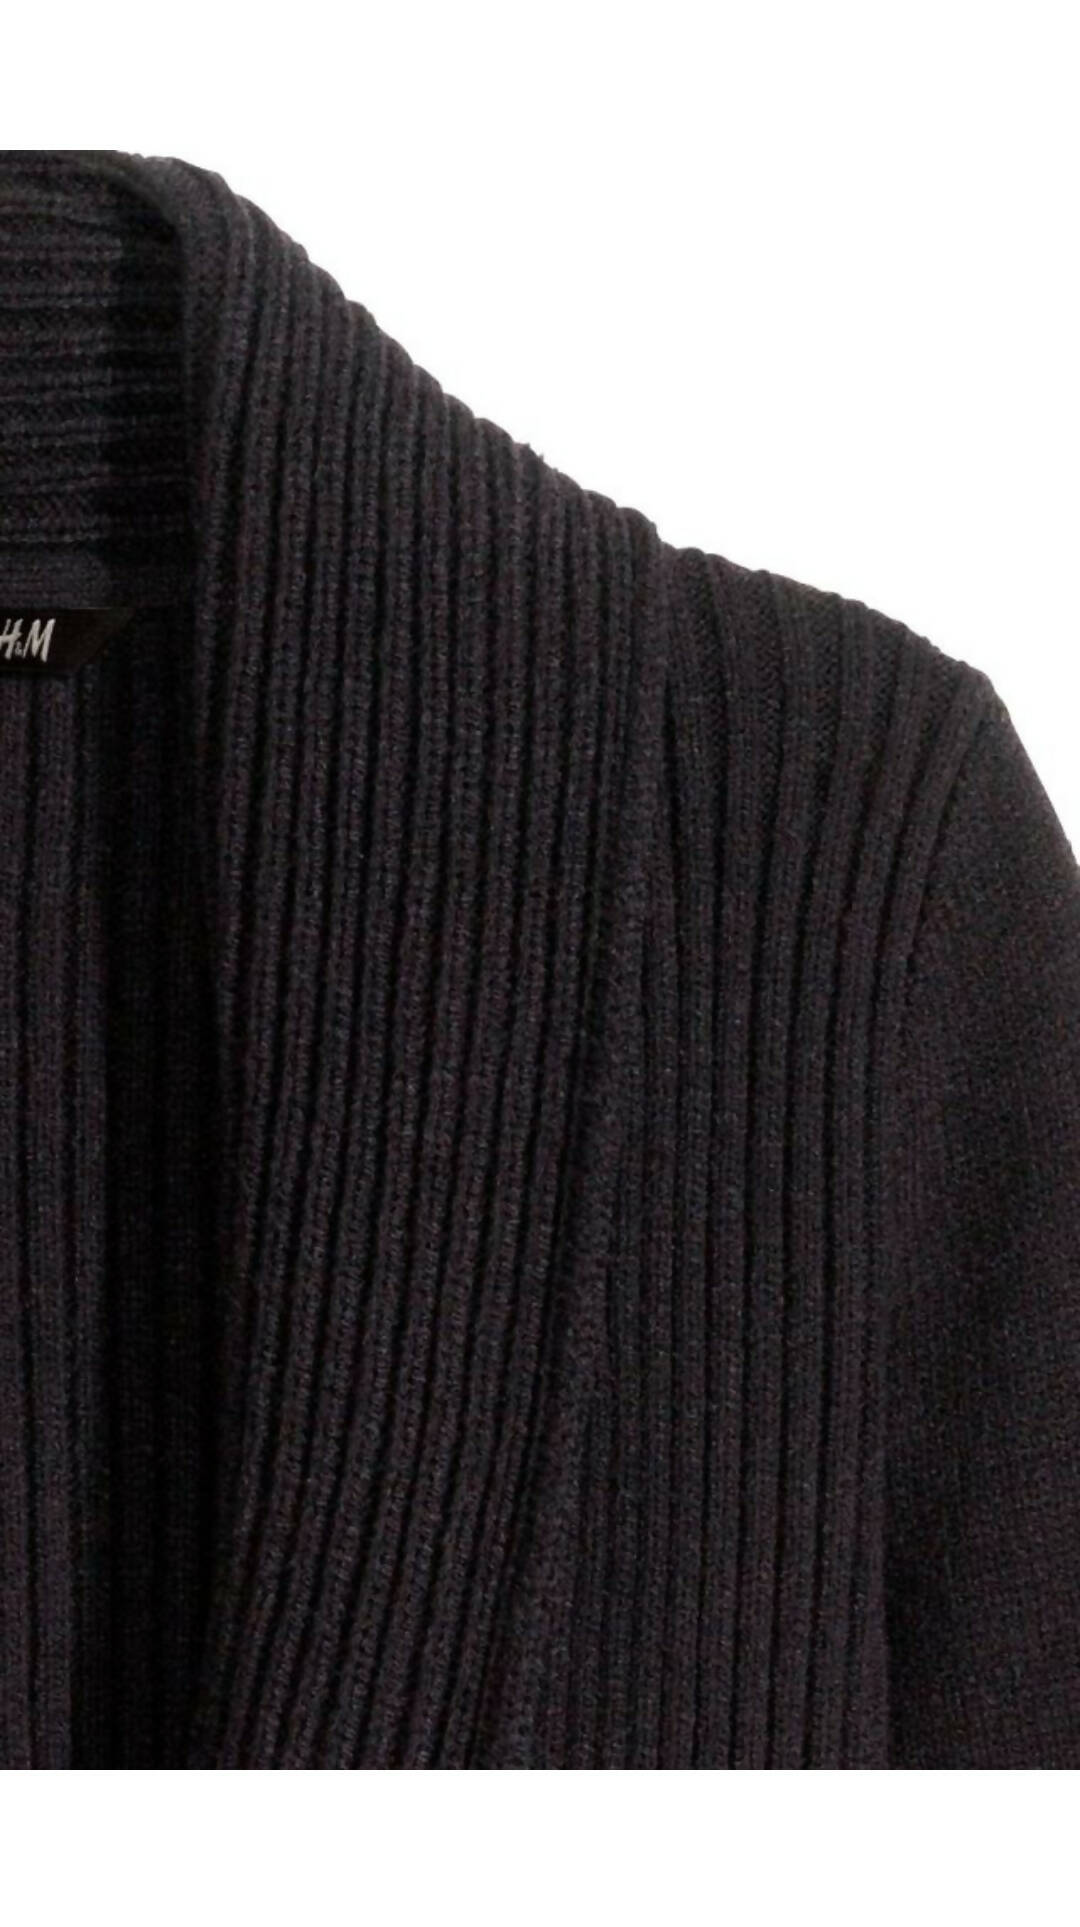 H&M | BLACK KNITTED CARDIGAN WITH SHAWL COLLAR | WOMEN SWEATERS & JACKETS | WORN ONCE